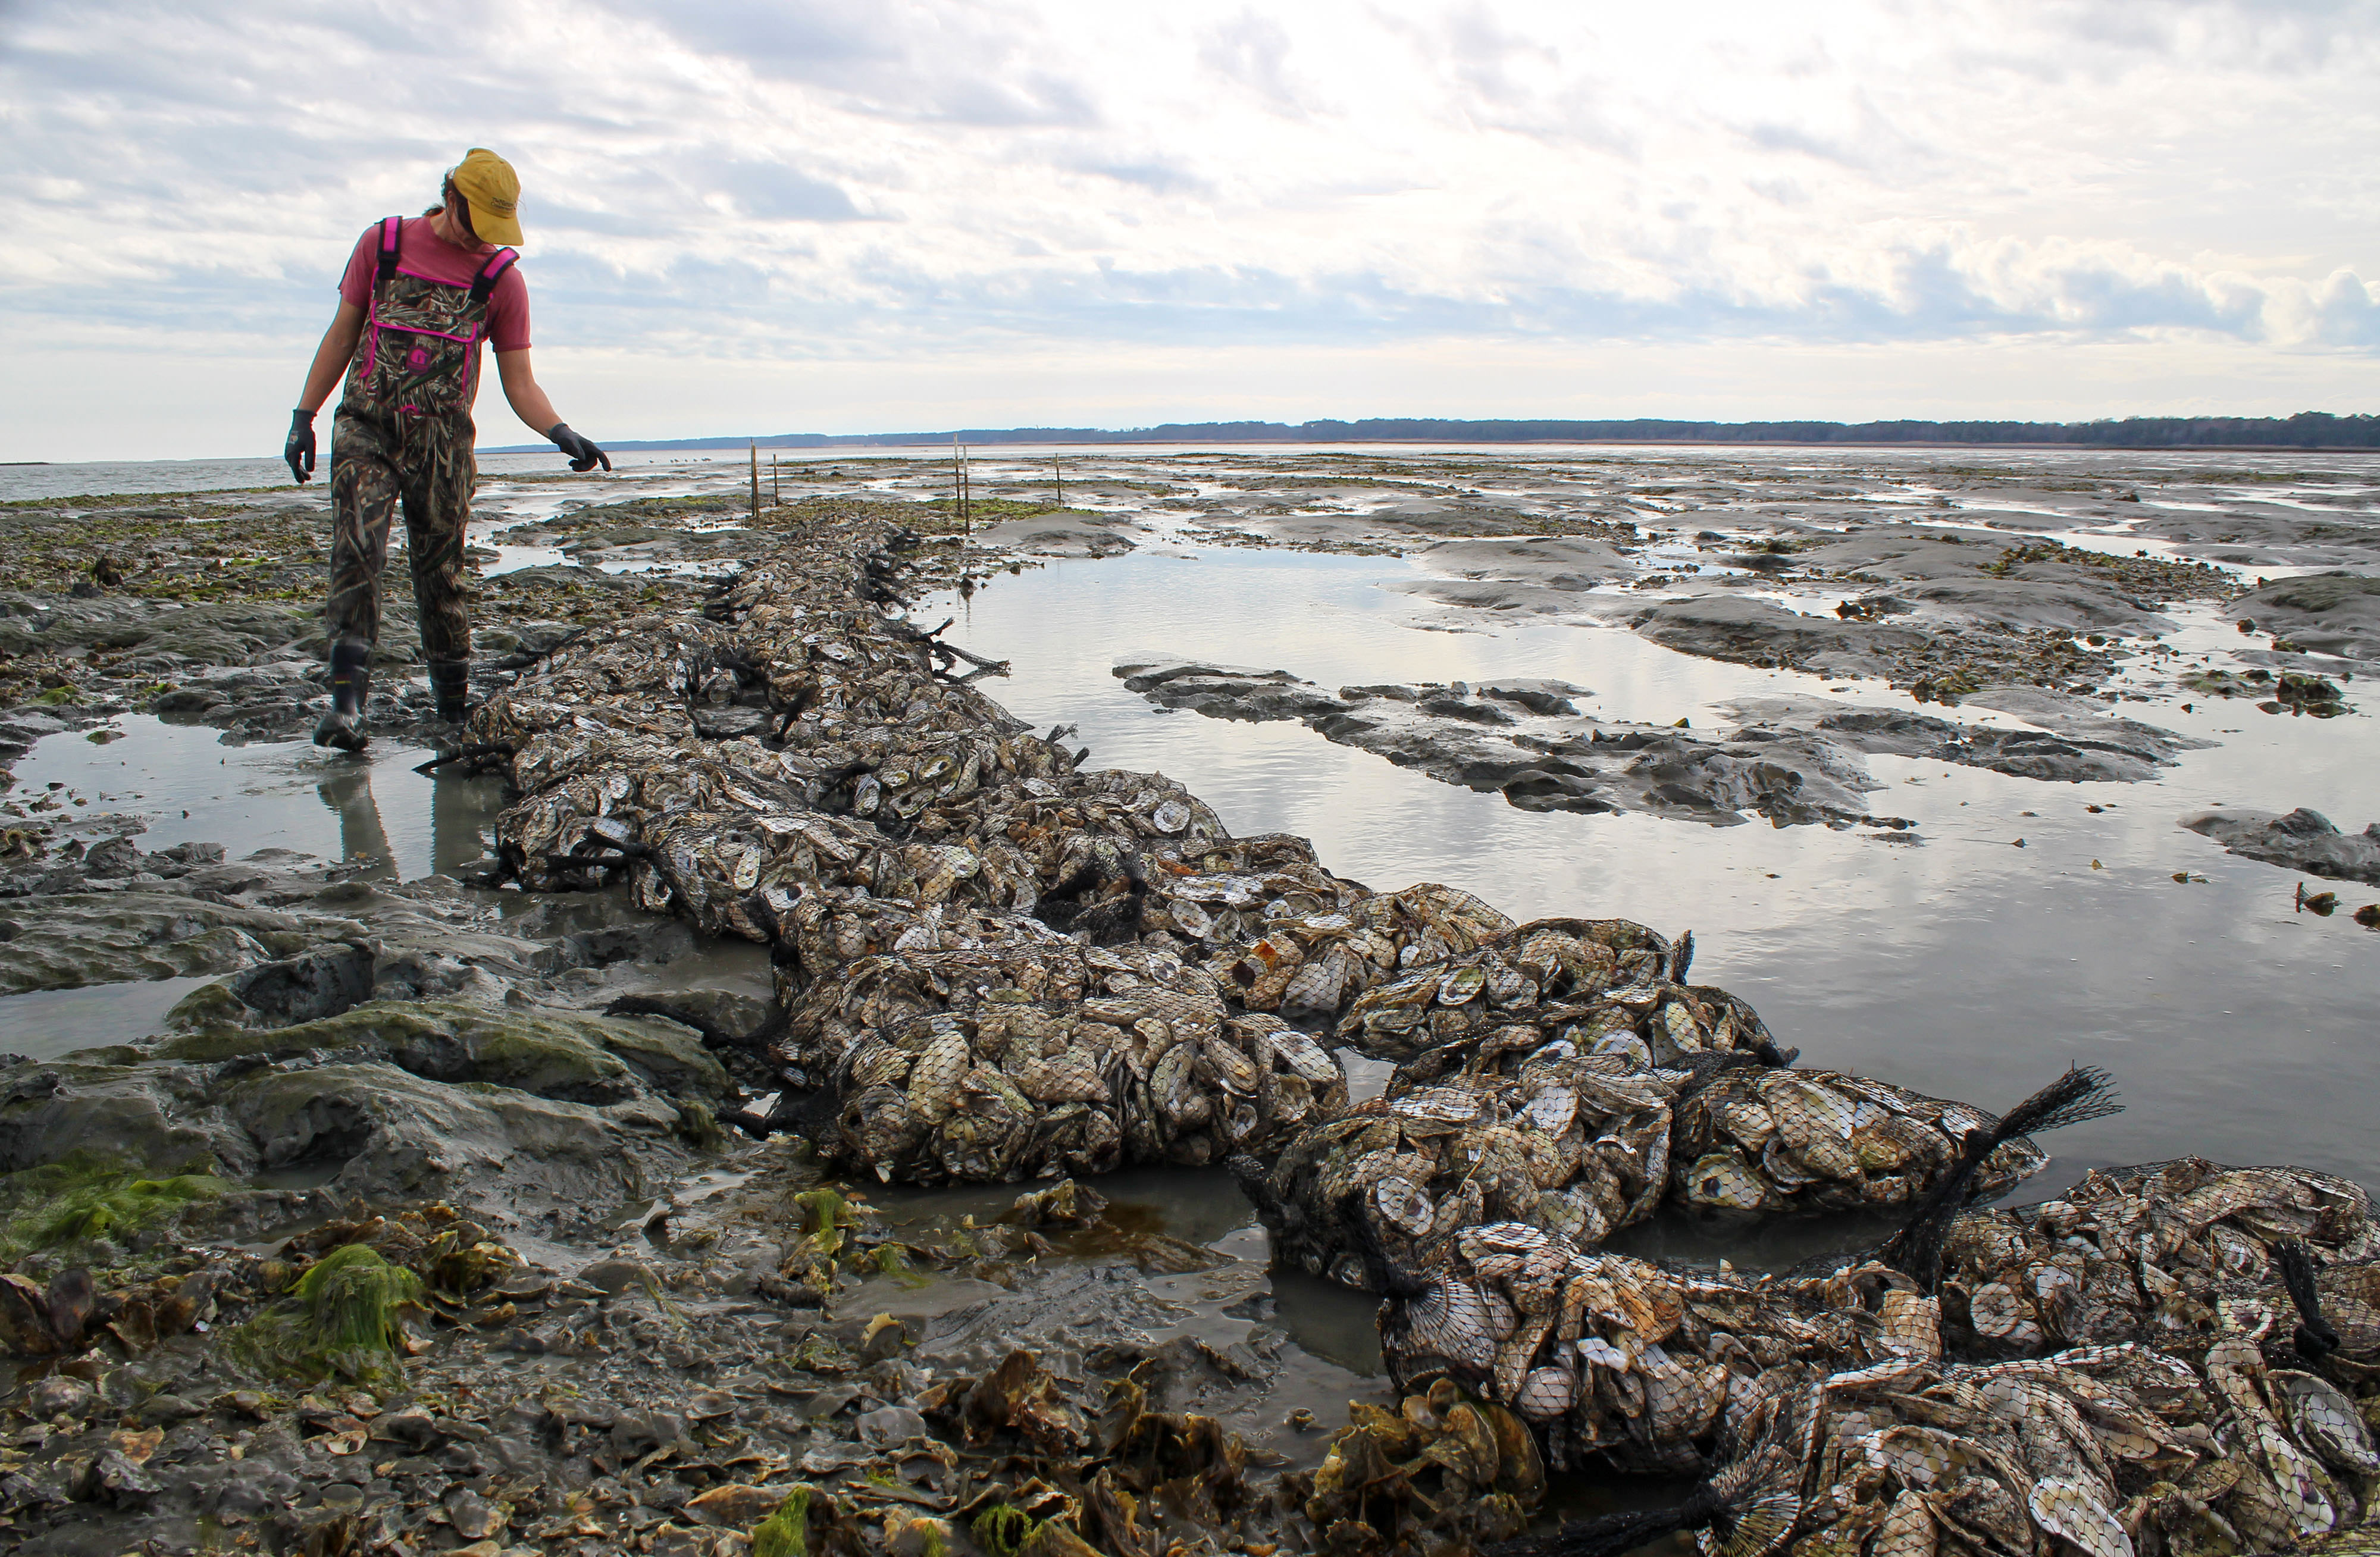 Large mesh bags filled with oyster shells are arranged in two rows on an exposed restored oyster reef during low tide. A woman wearing chest waders stands at the edge of the reef counting bags. 